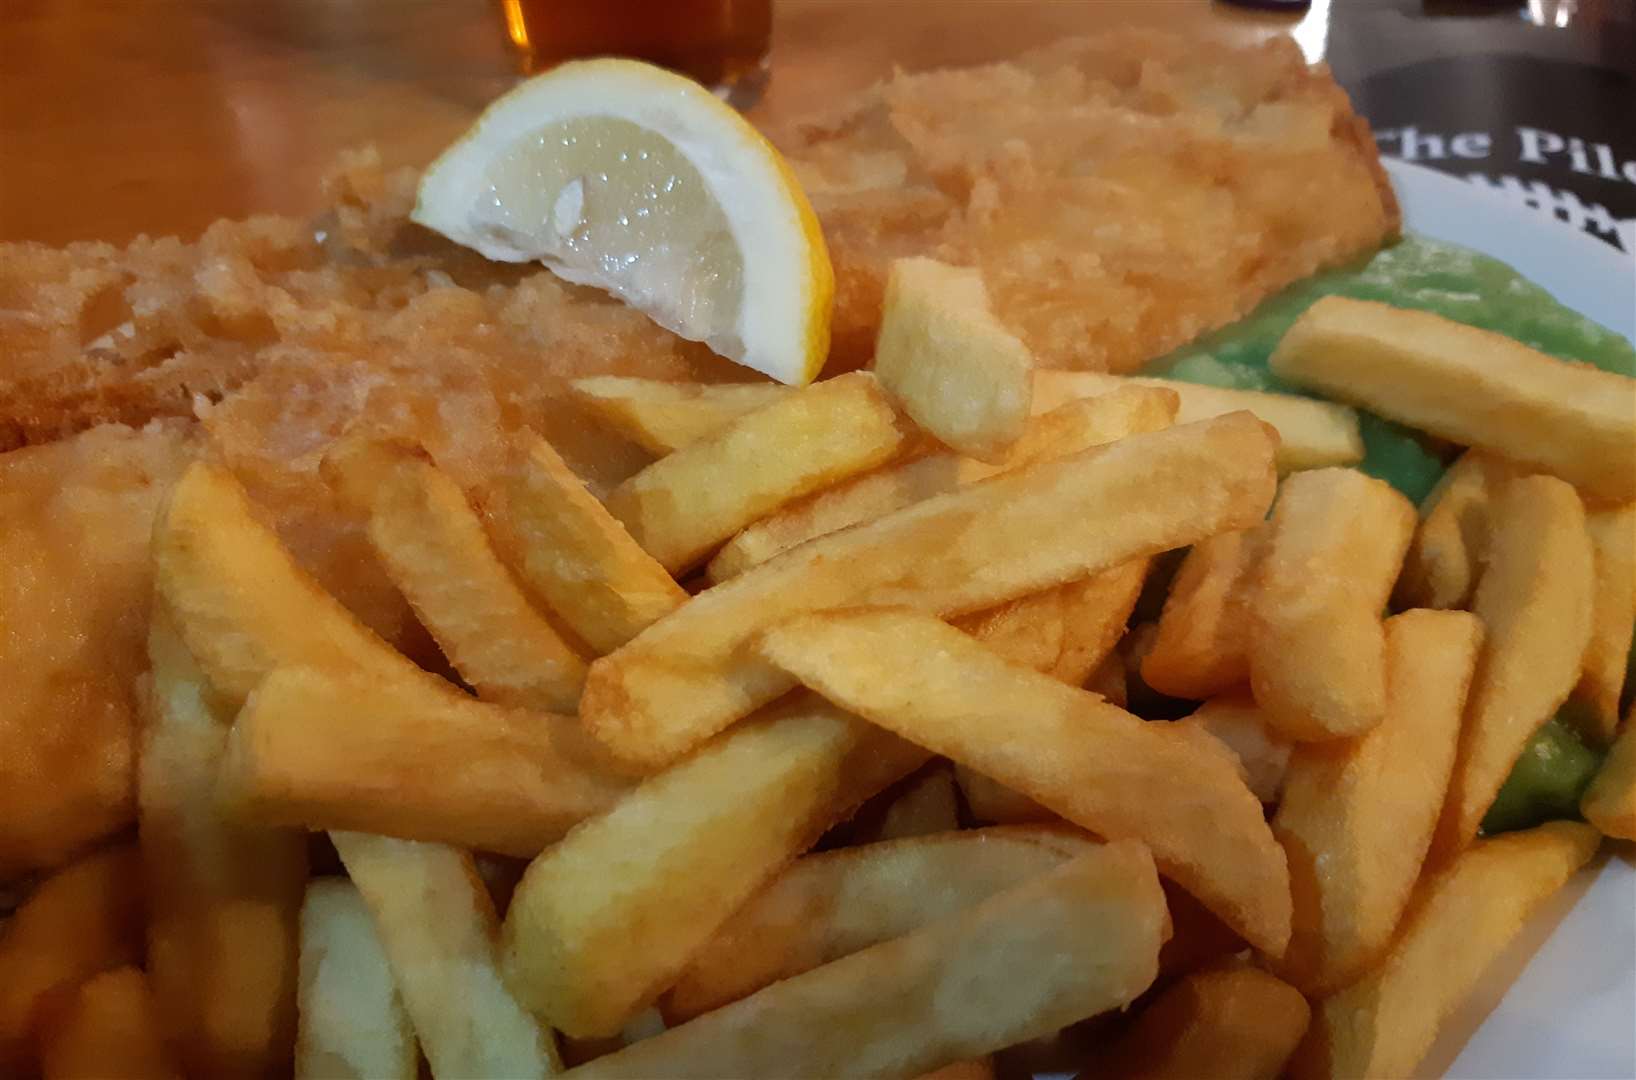 Fish and chips come in generous portions at the Pilot Inn